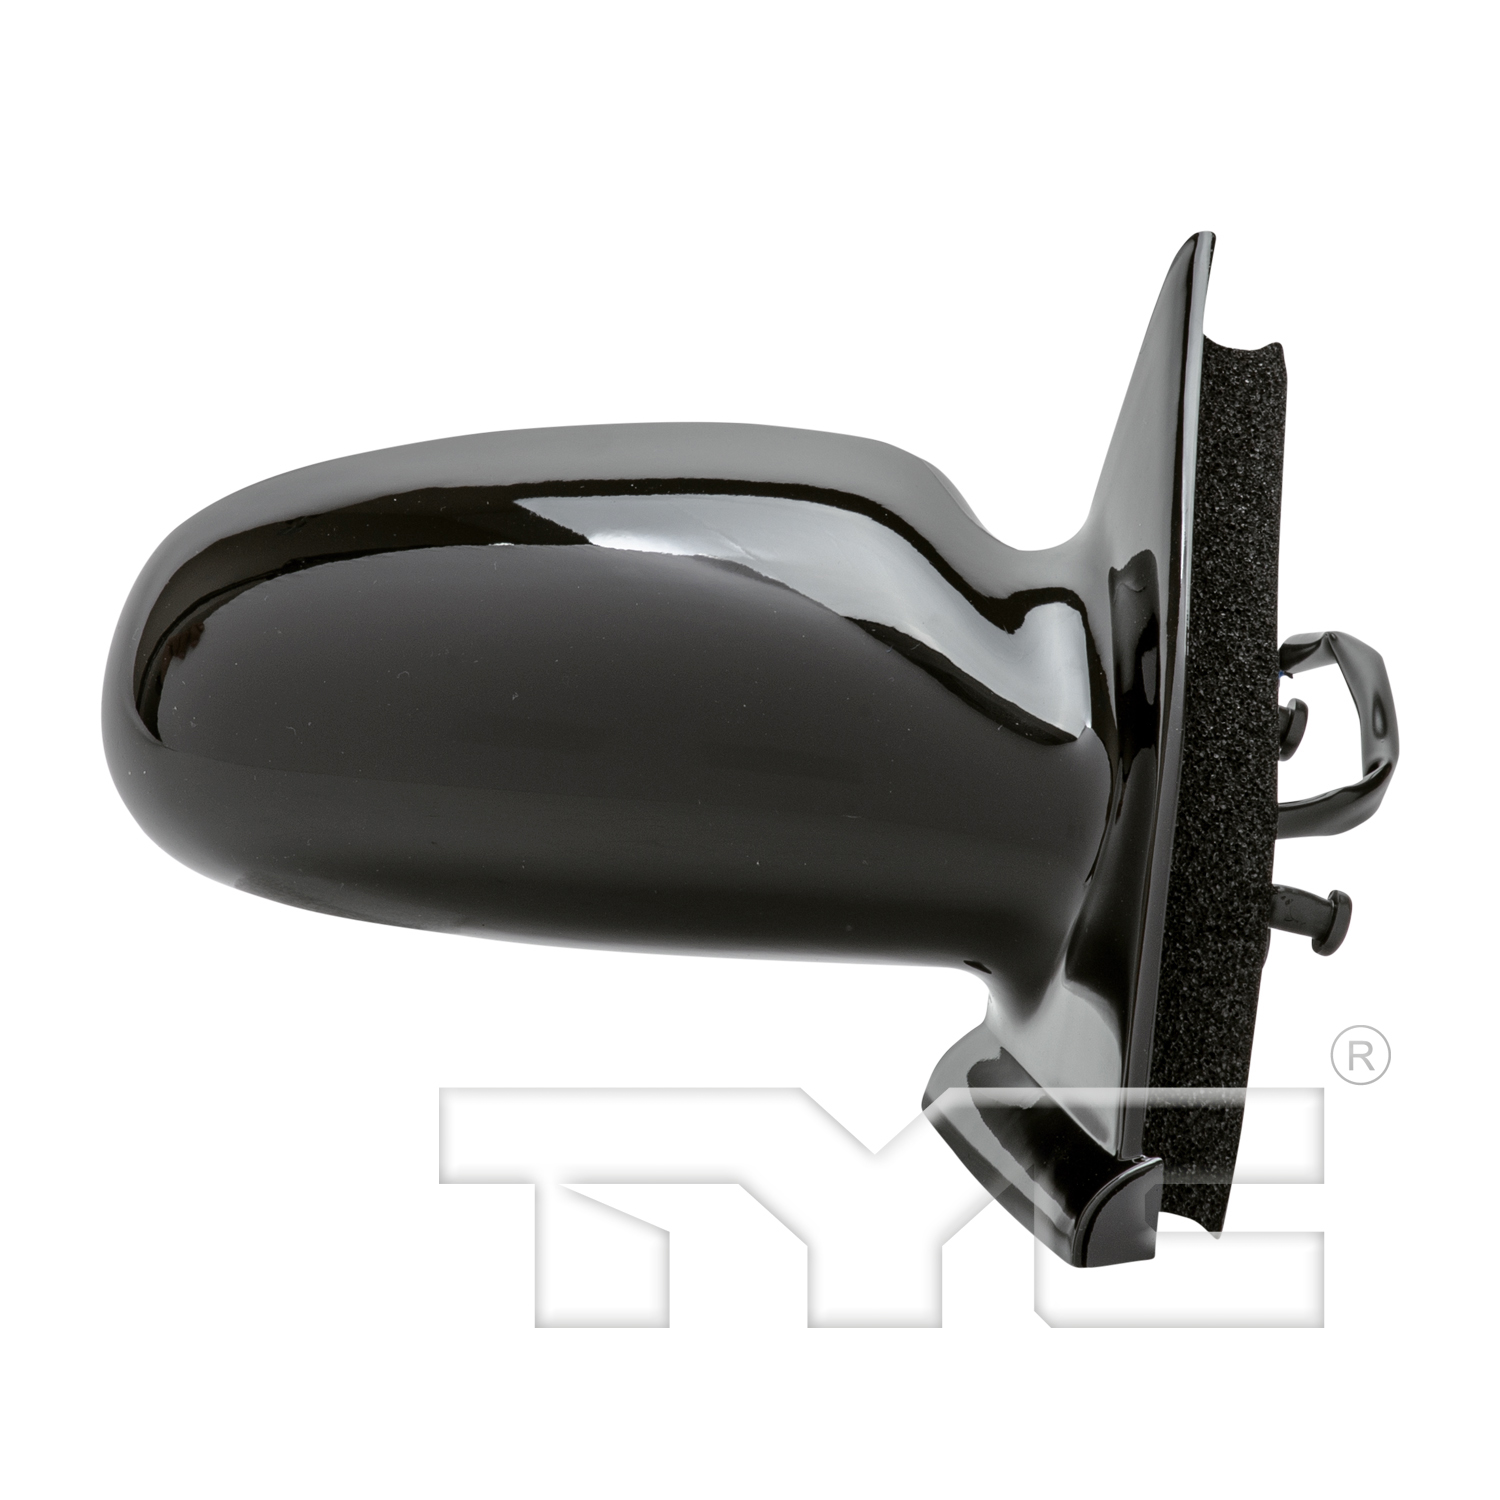 Aftermarket MIRRORS for SATURN - SL, SL,96-02,RT Mirror outside rear view